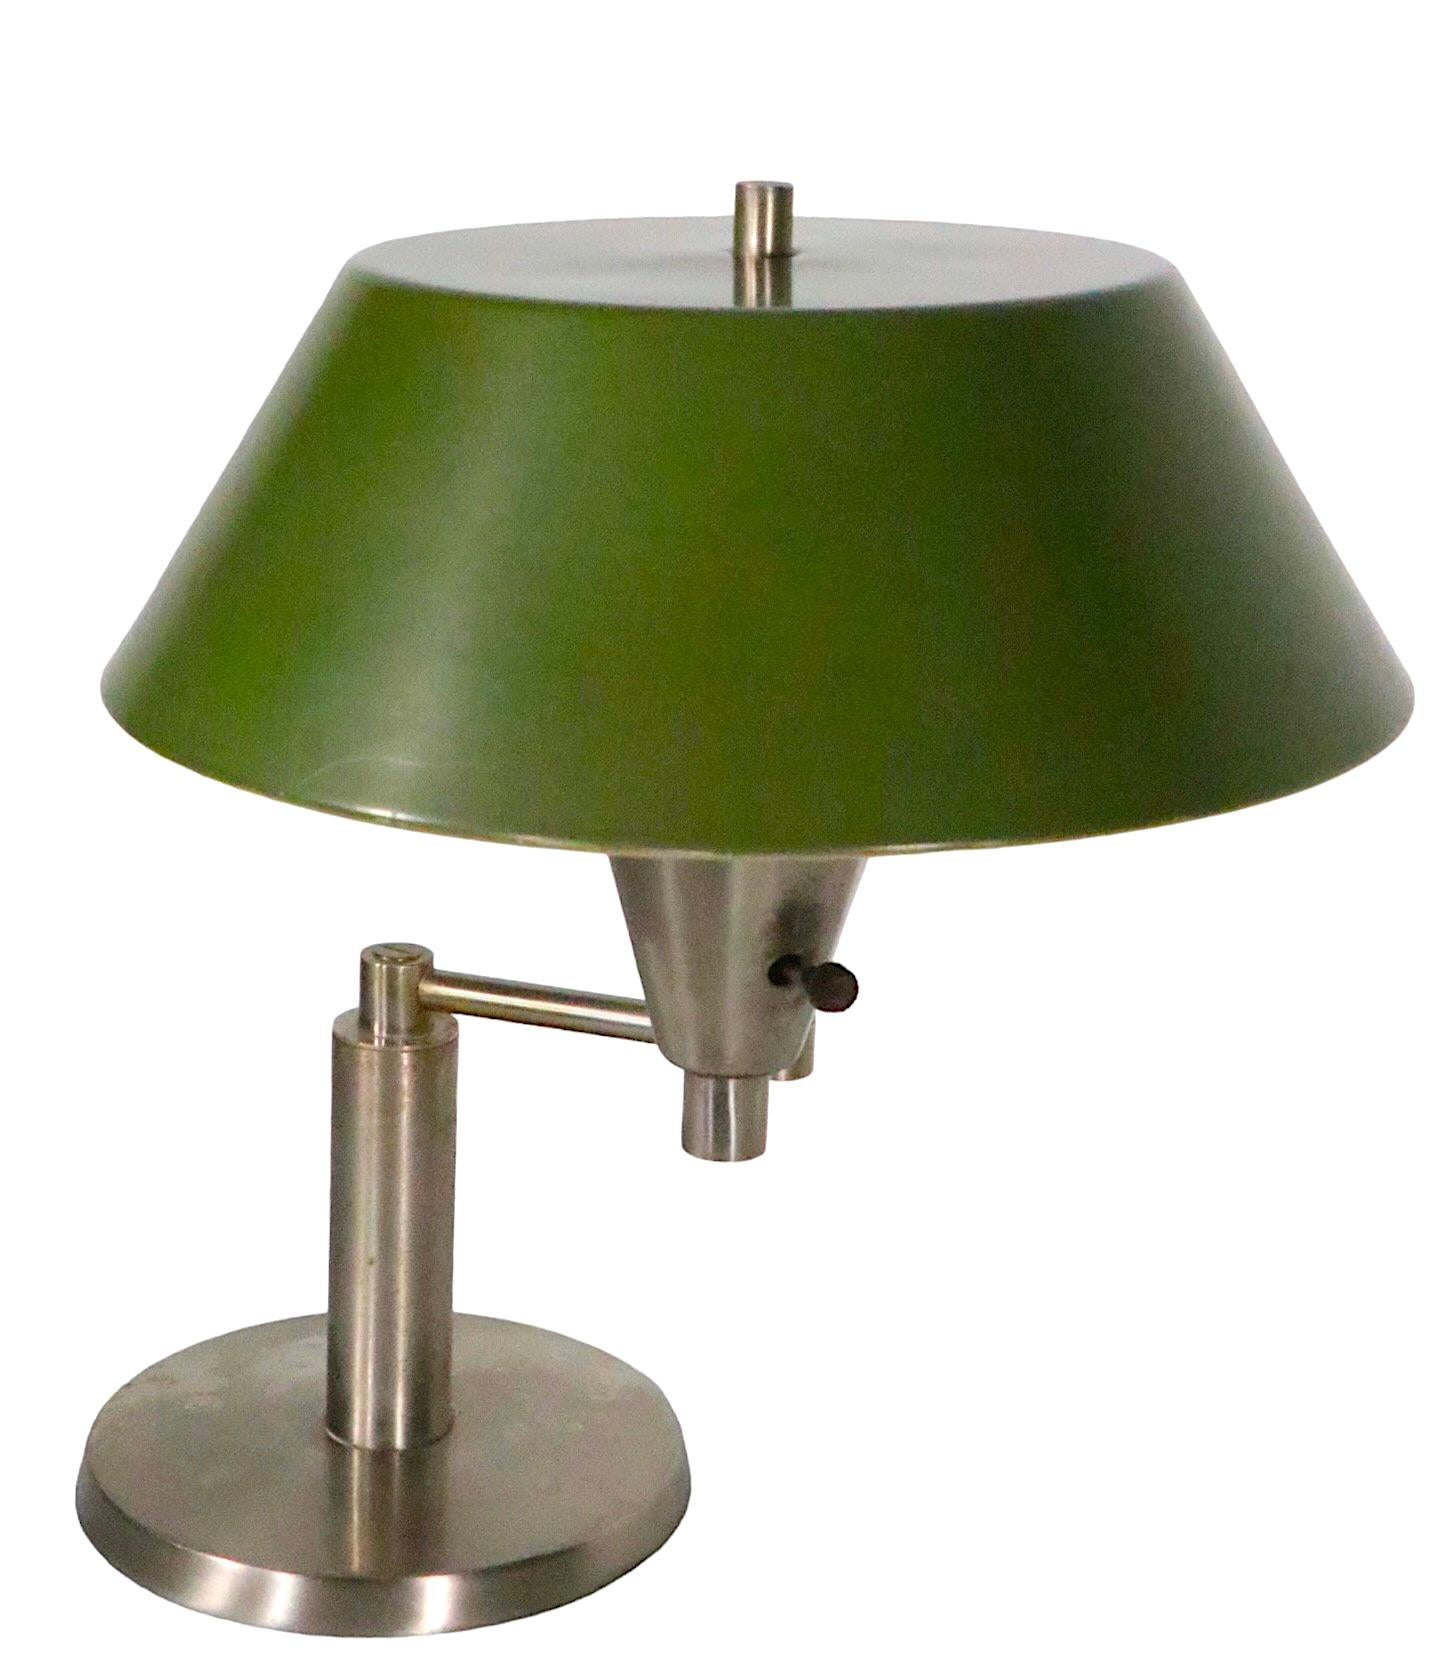 Iconic Walter Von Nessen Swing Arm Desk Lamp with Original Metal Shade For Sale 4